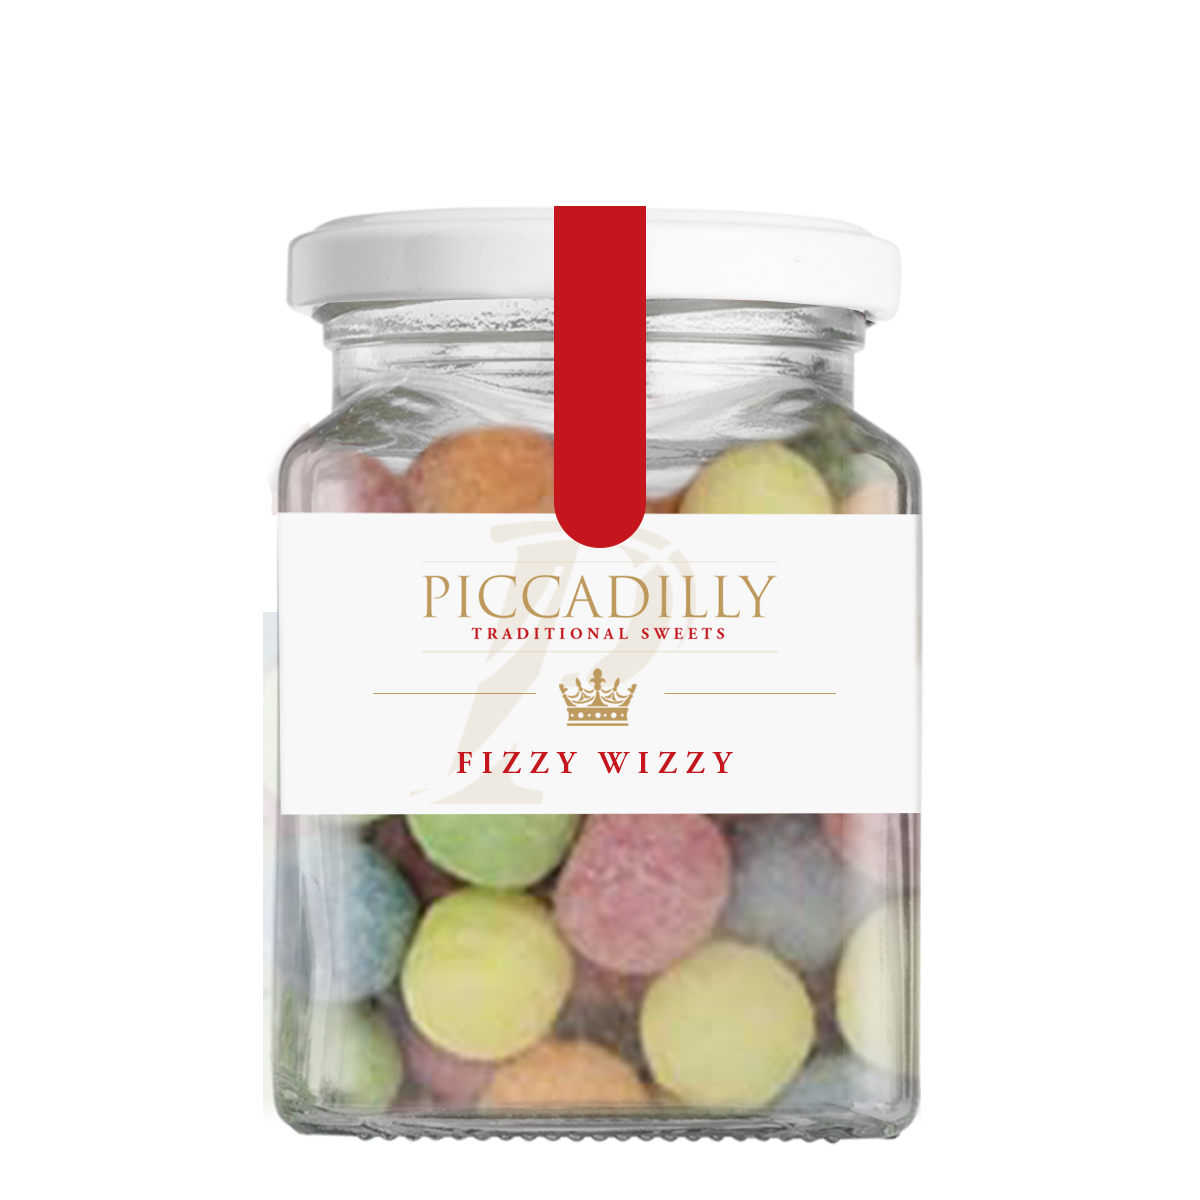 Piccadilly Traditional Sweets Fizzy Wizzy 150g